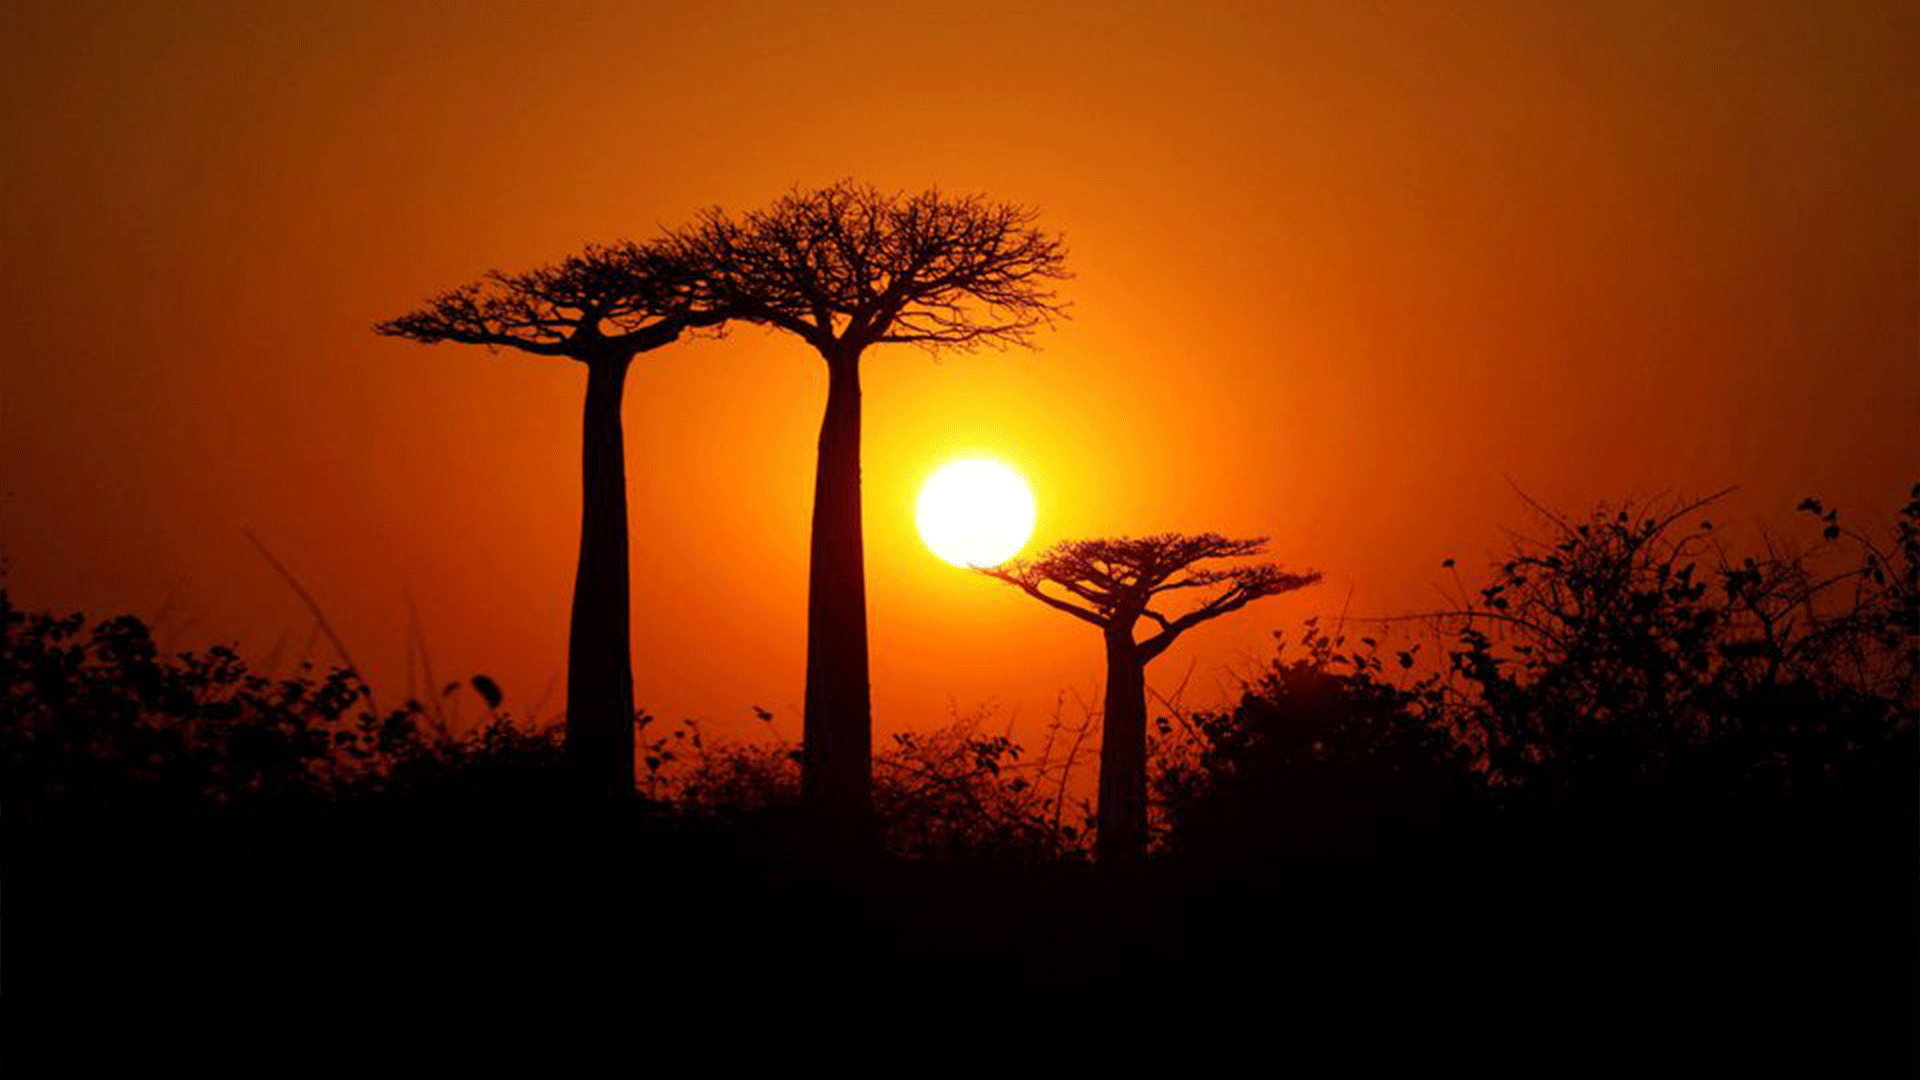  The sun rises behind Baobab trees at Baobab alley near the city of Morondava, Madagascar, August 30, 2019. REUTERS/Baz Ratner